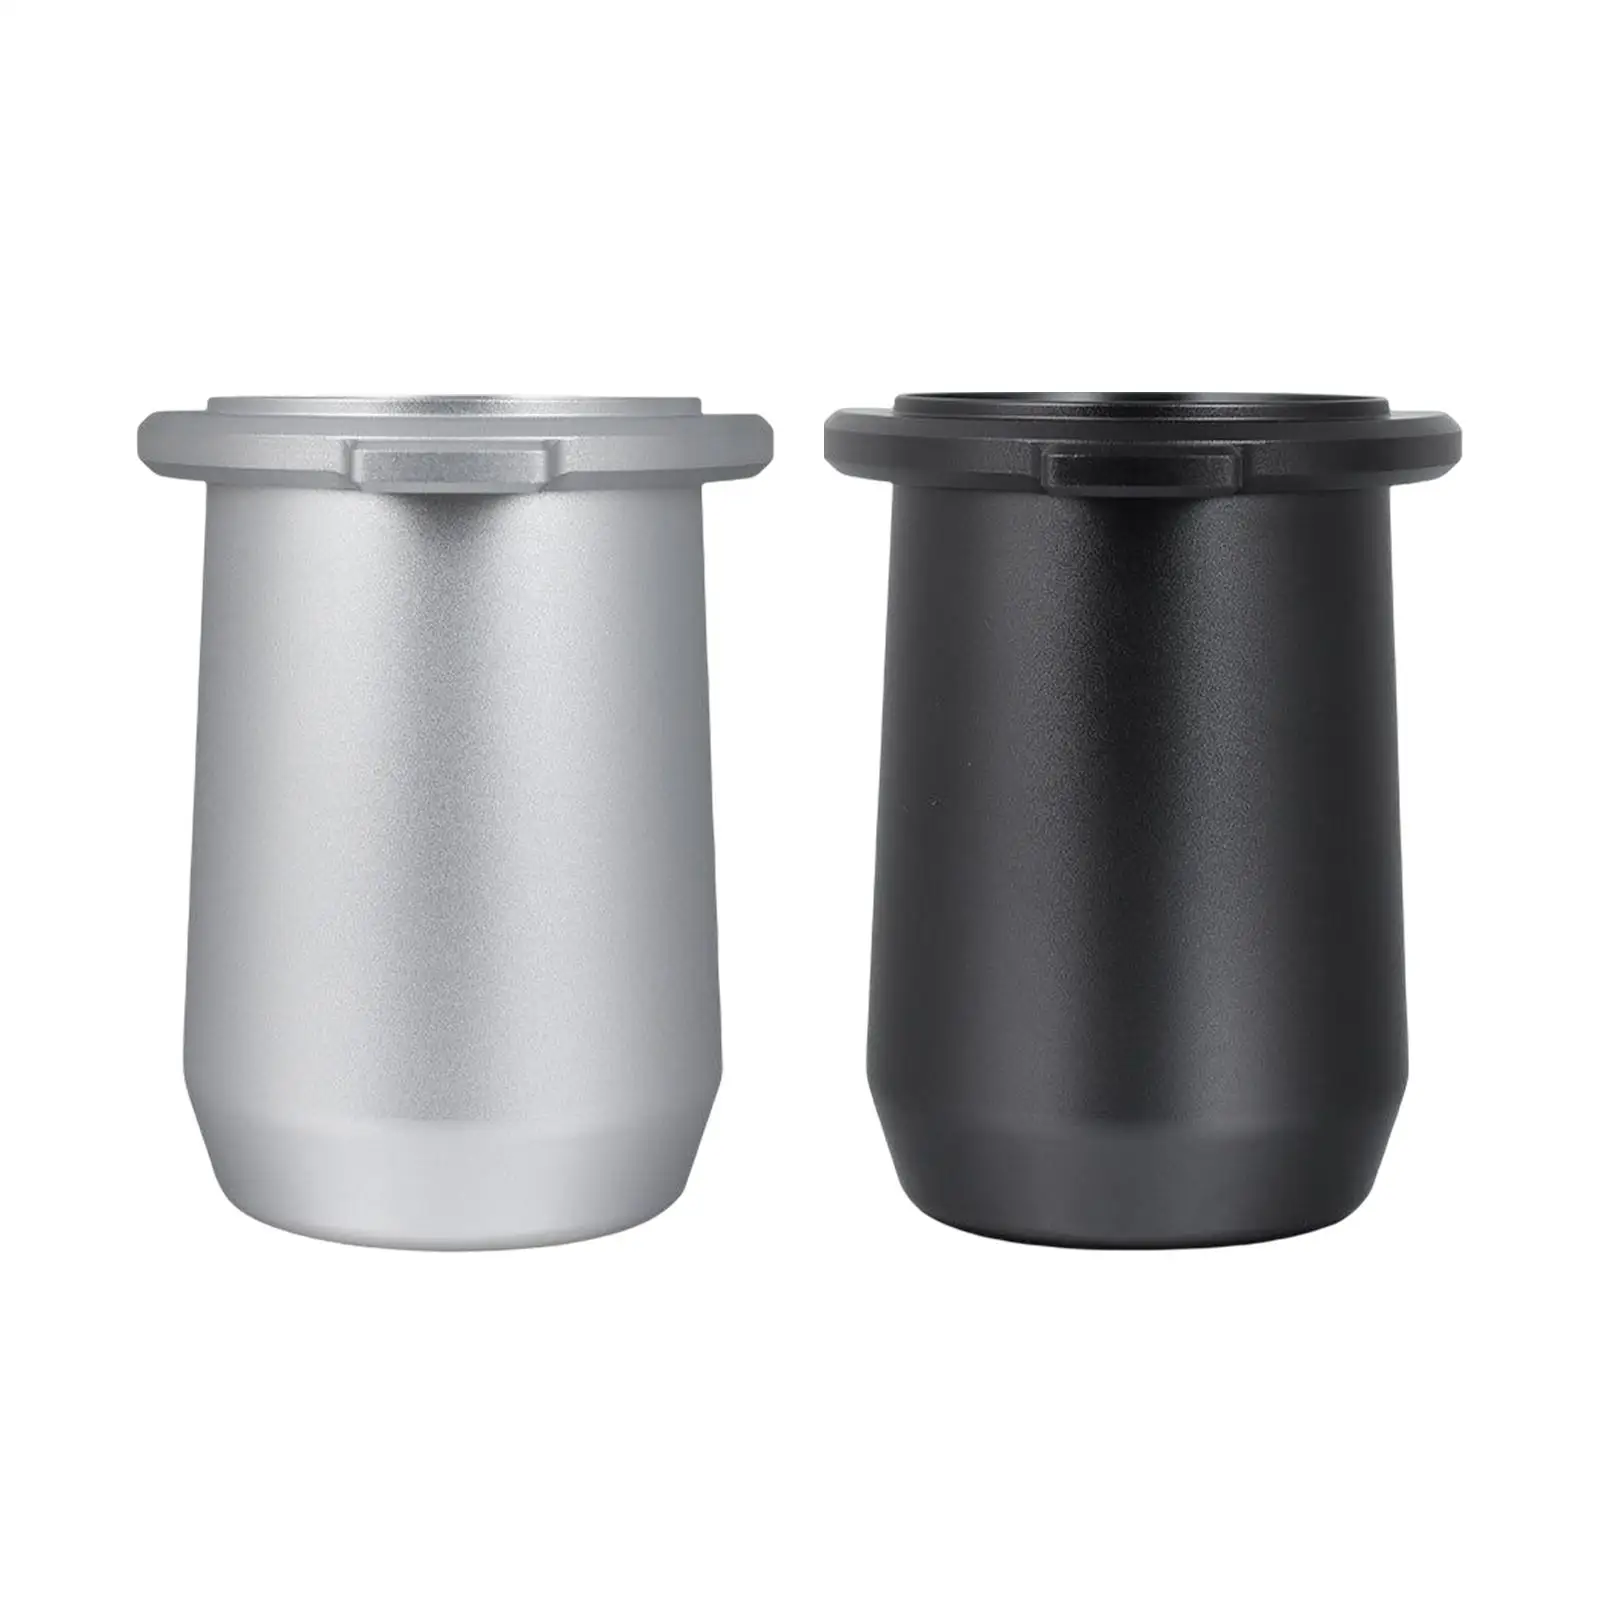 Aluminum Alloy Coffee Dosing Cup Sniffing Mug Durable Coffee Dosing Cup for 54mm Coffee Tamper Espresso Machine Kitchen Tools